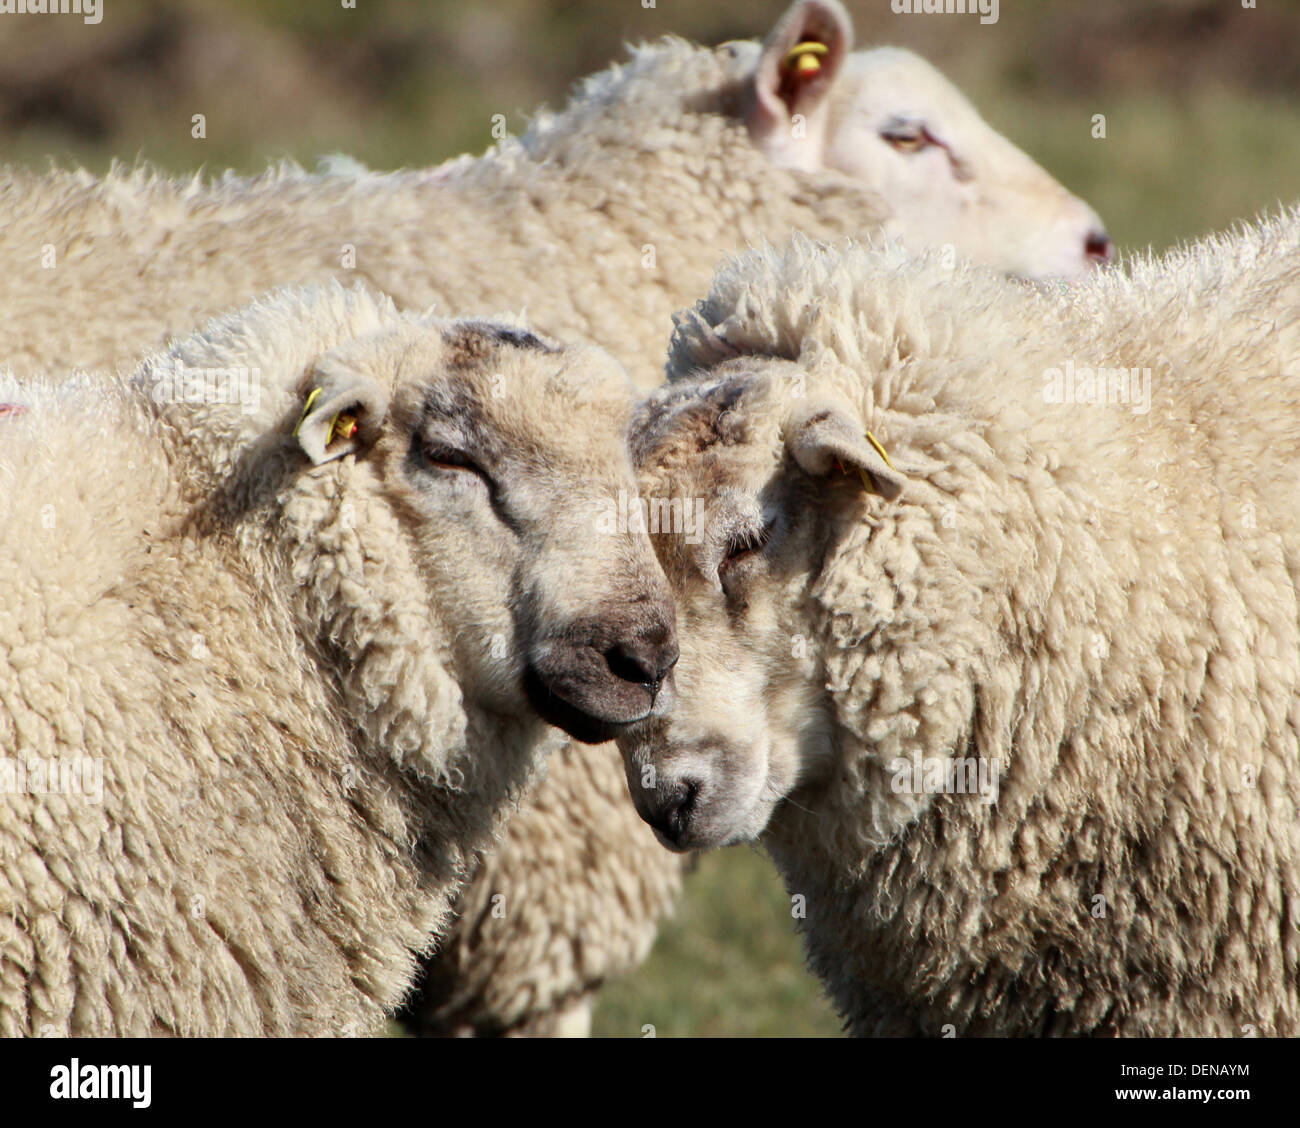 Portrait  of  mature sheep  looking into the camera and rubbing heads, with a third sheep in the background Stock Photo